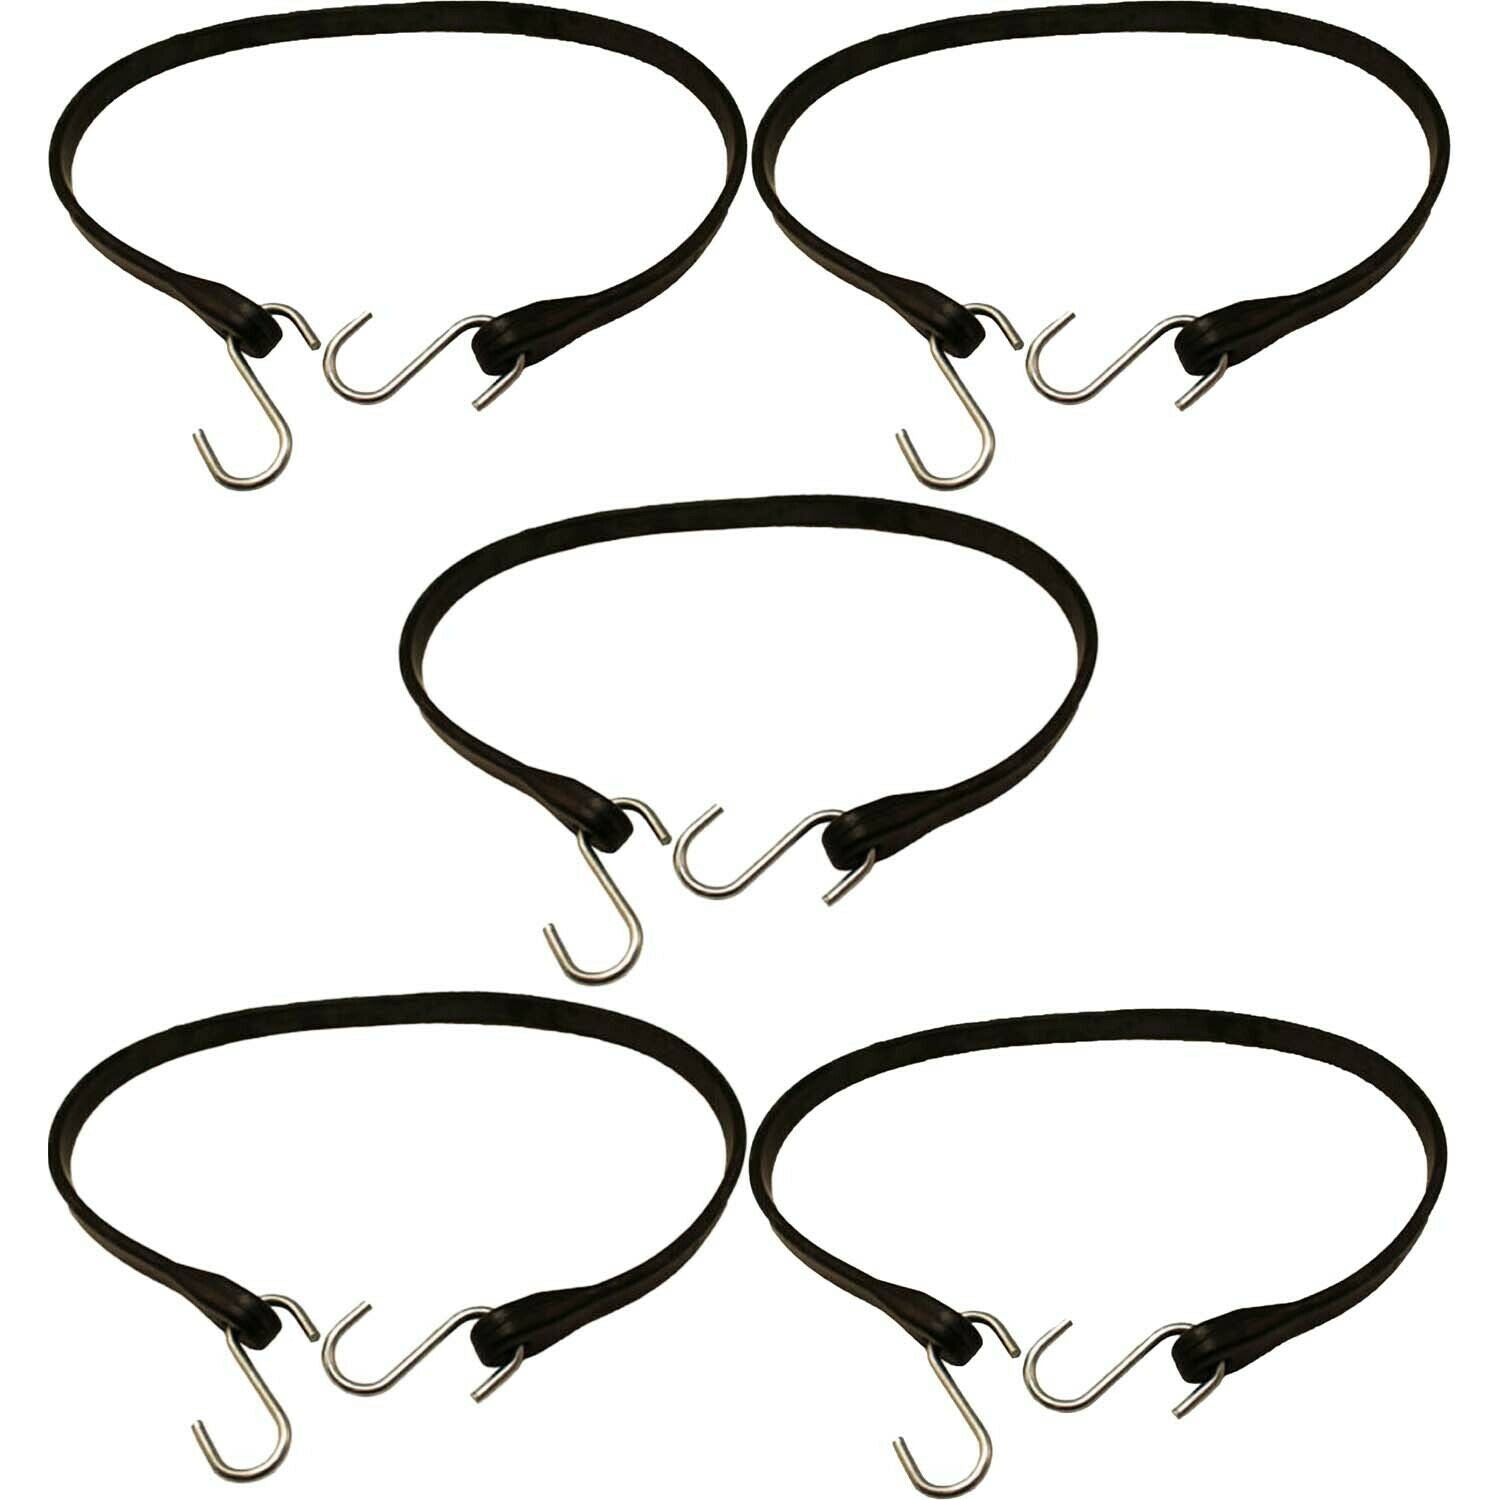 Peerless CC8441 41" EPDM Rubber Bungee Tarp Strap with Hooks Pack of 5